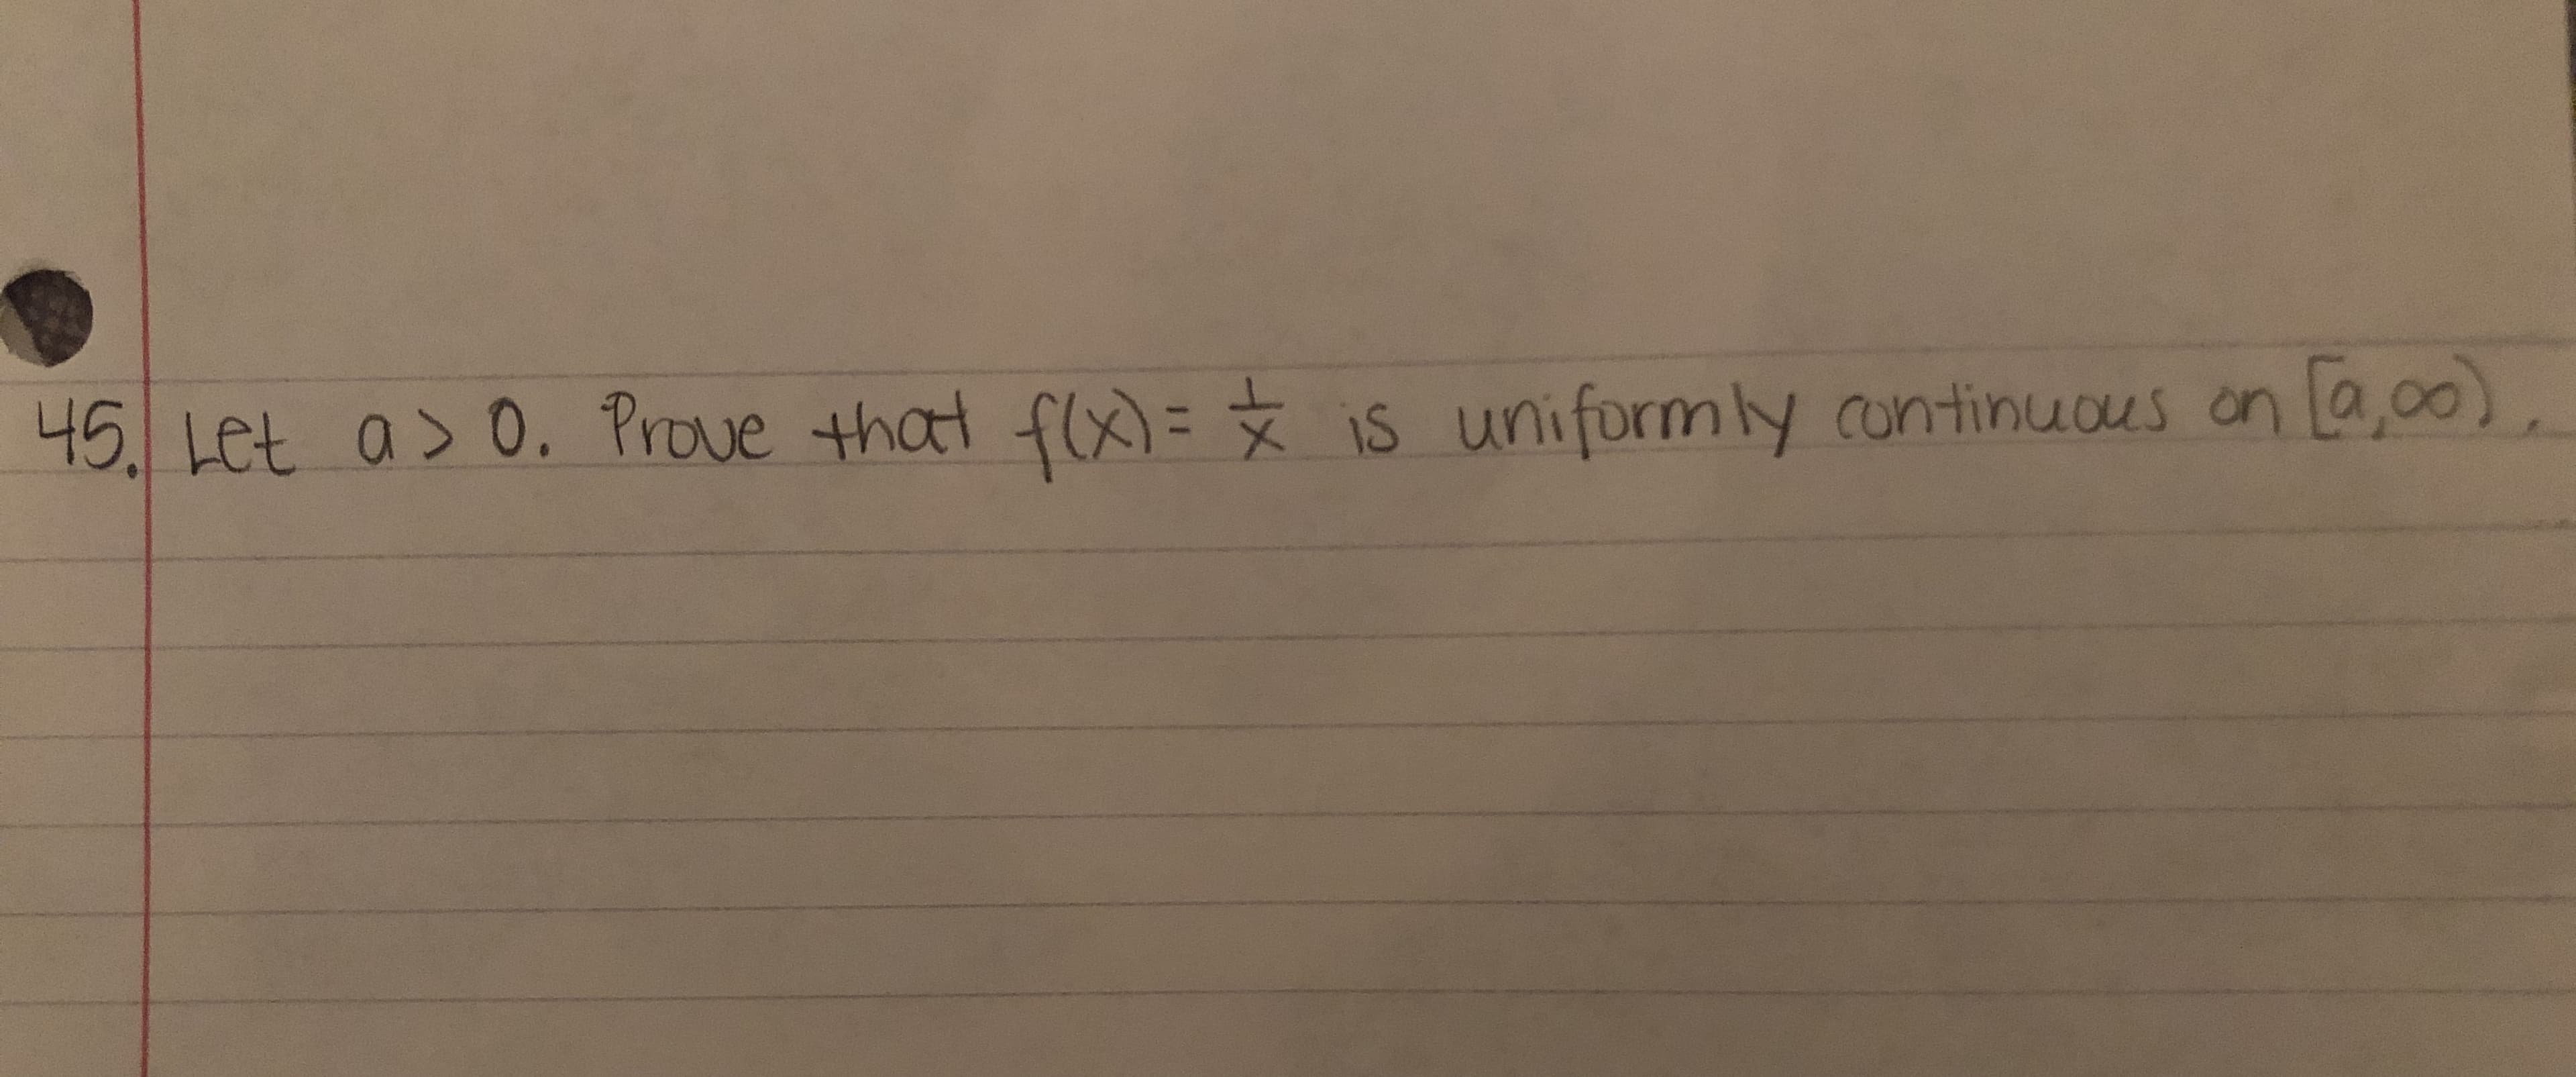 45. Let a> 0. Prove that f(X)= iS uniformly continuaus on
on [a,00),
